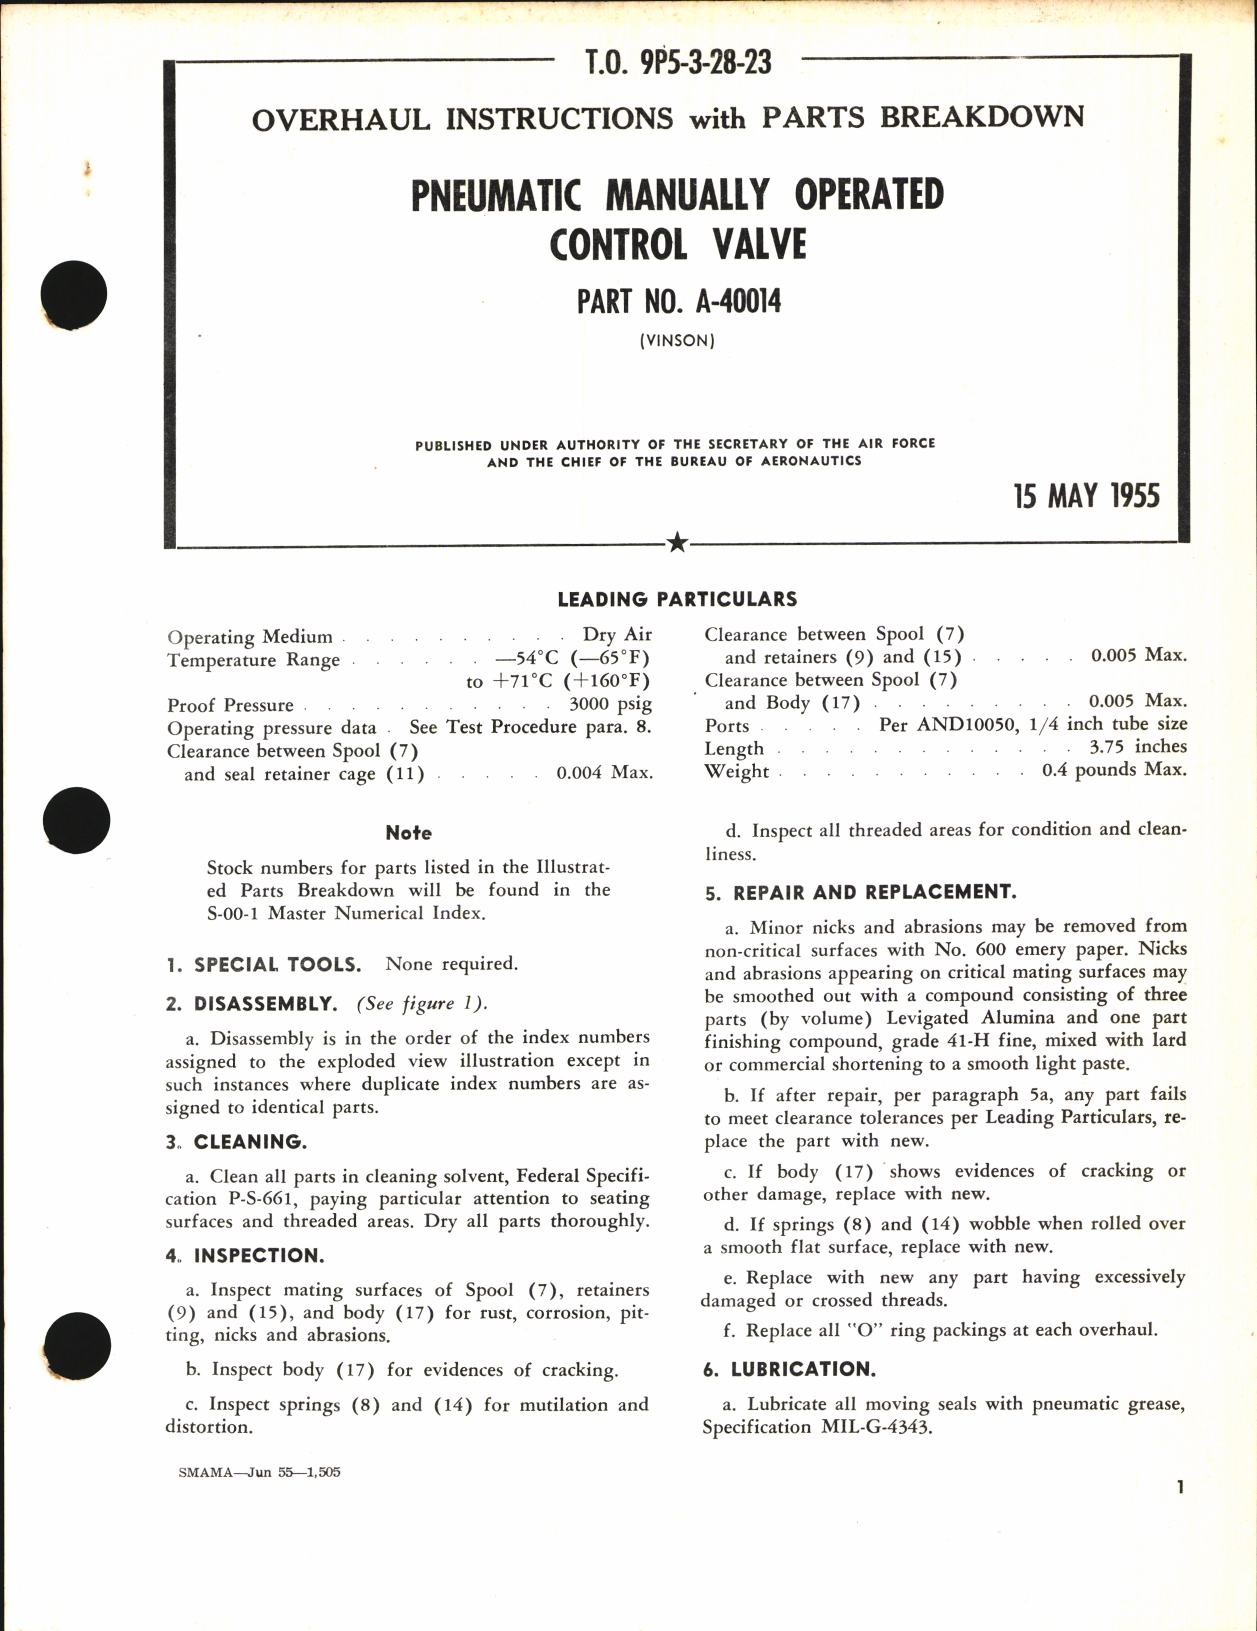 Sample page 1 from AirCorps Library document: Overhaul Instructions with Parts Breakdown for Pneumatic Manually Operated Control Valve Part No. A-40014